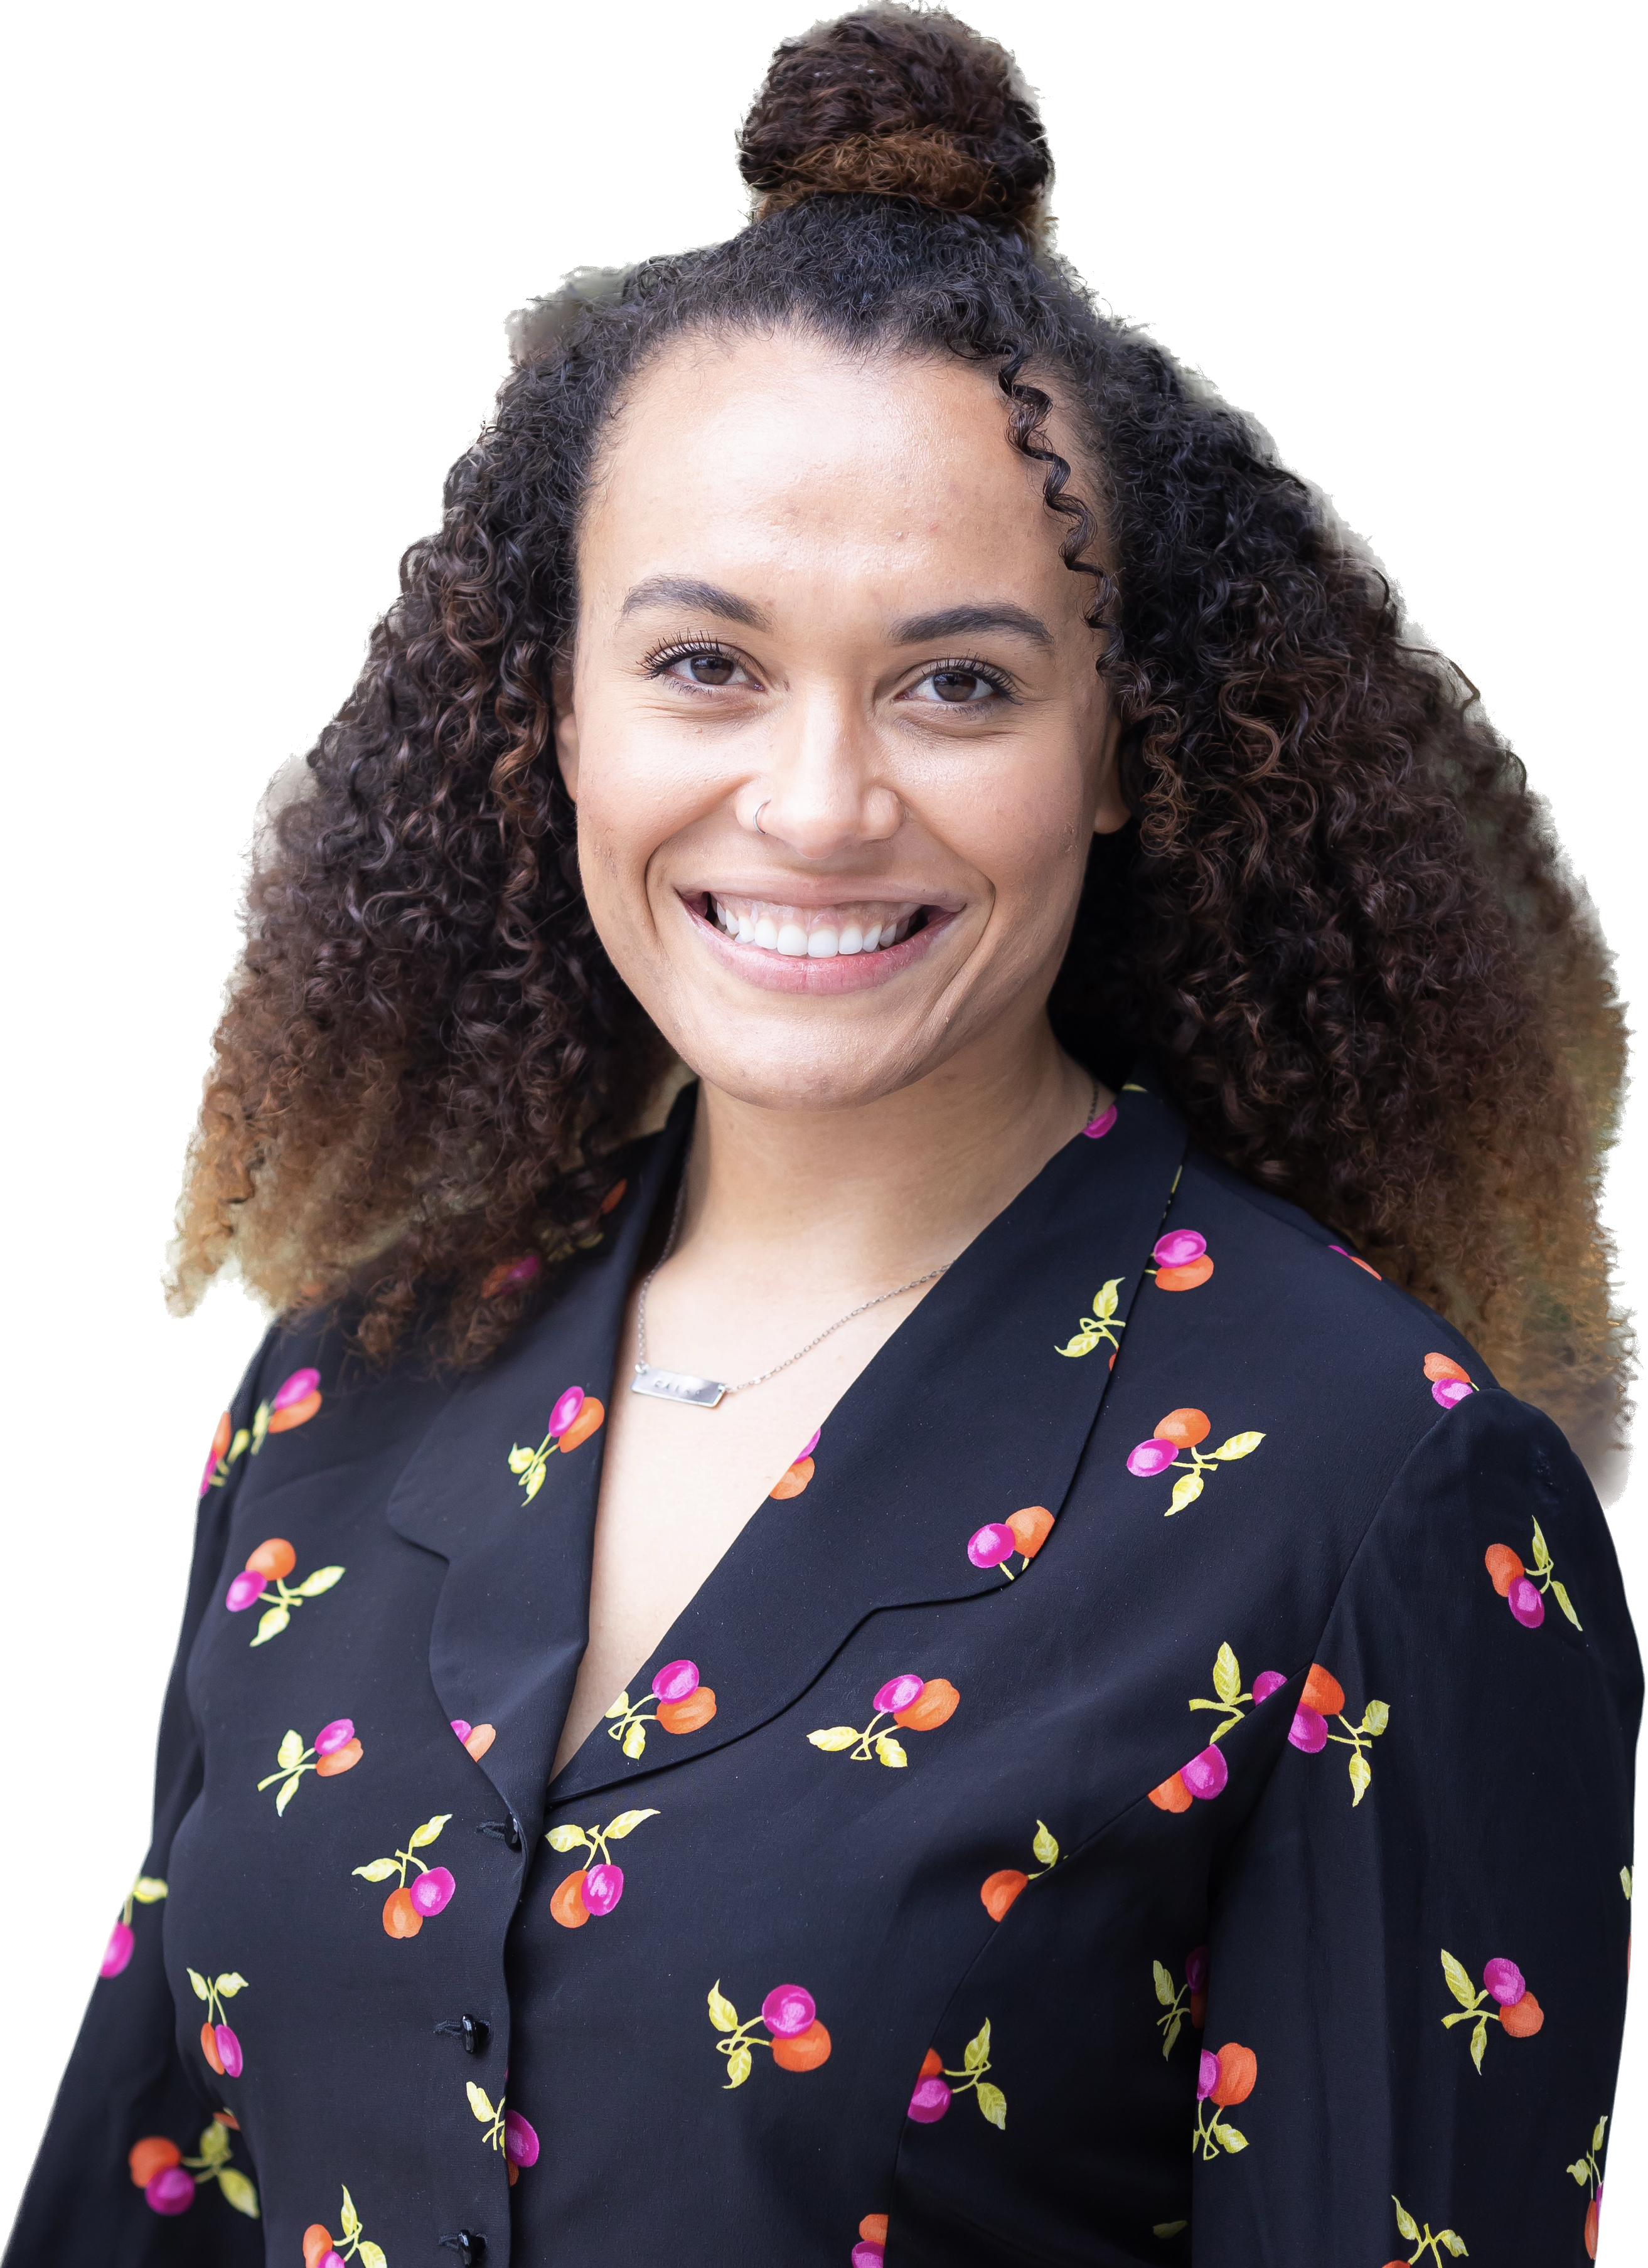 Cairo is an Education Field Representative and District Scheduler for U.S. House of Representatives member Congressman Scott Peters (CA-50). She is an Aaron Price Fellows alum from the Class of 2016 and has been a facilitator since 2021. 